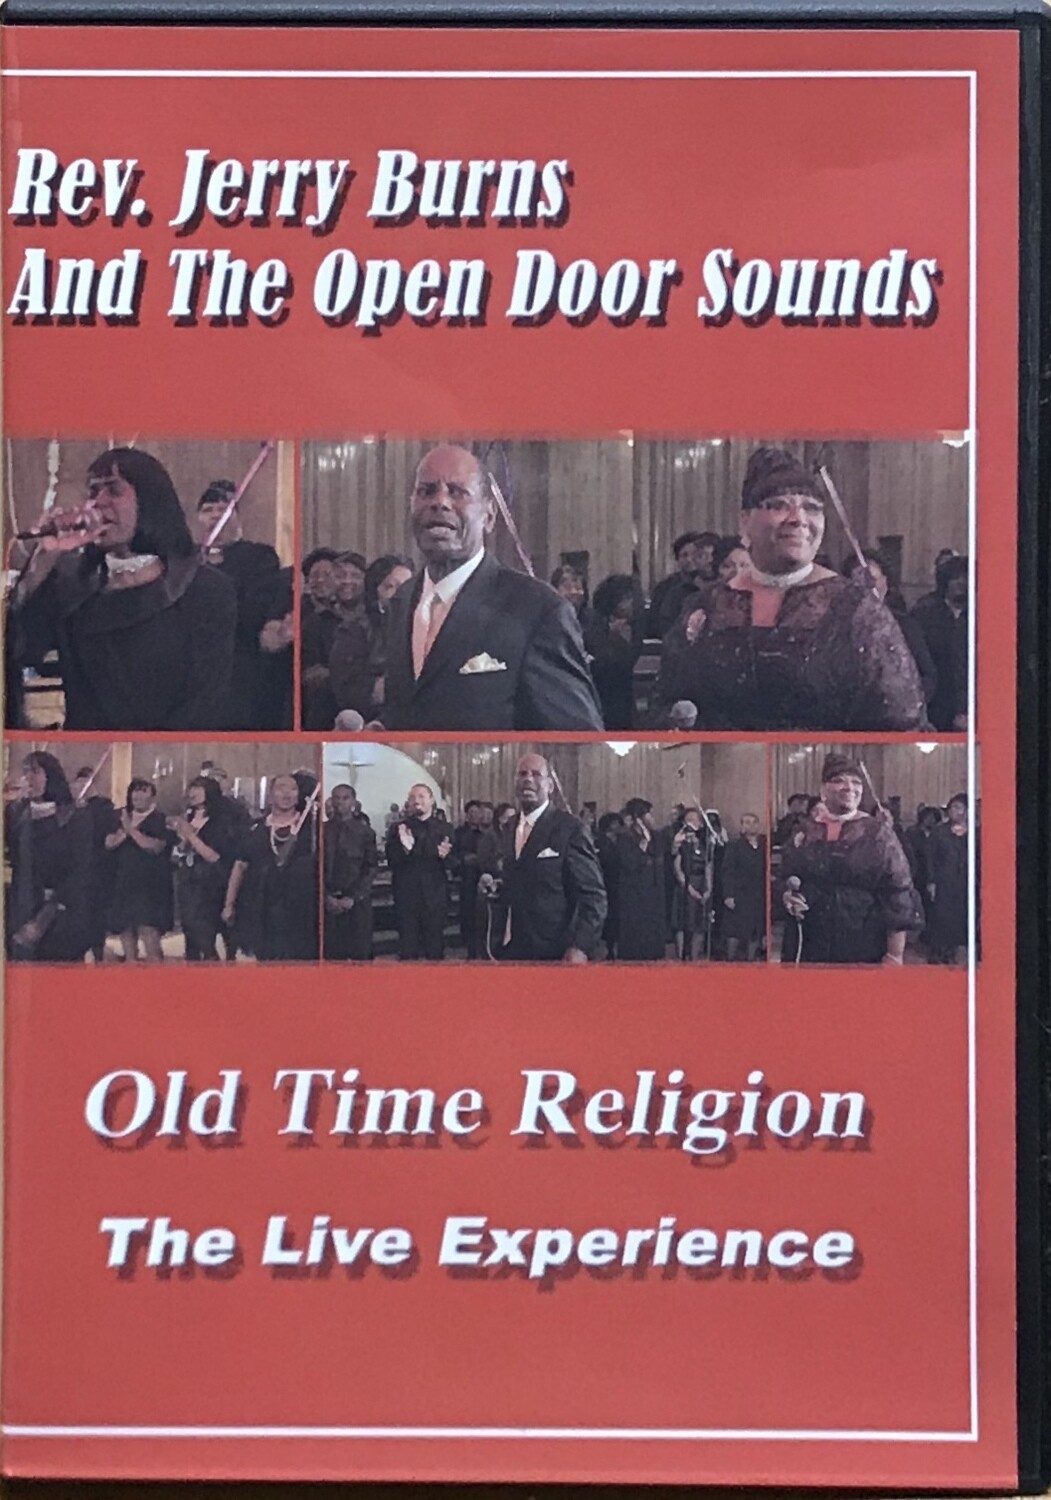 Rev. Jerry Burns and The Open Door Sounds 
Old Time Religion DVD